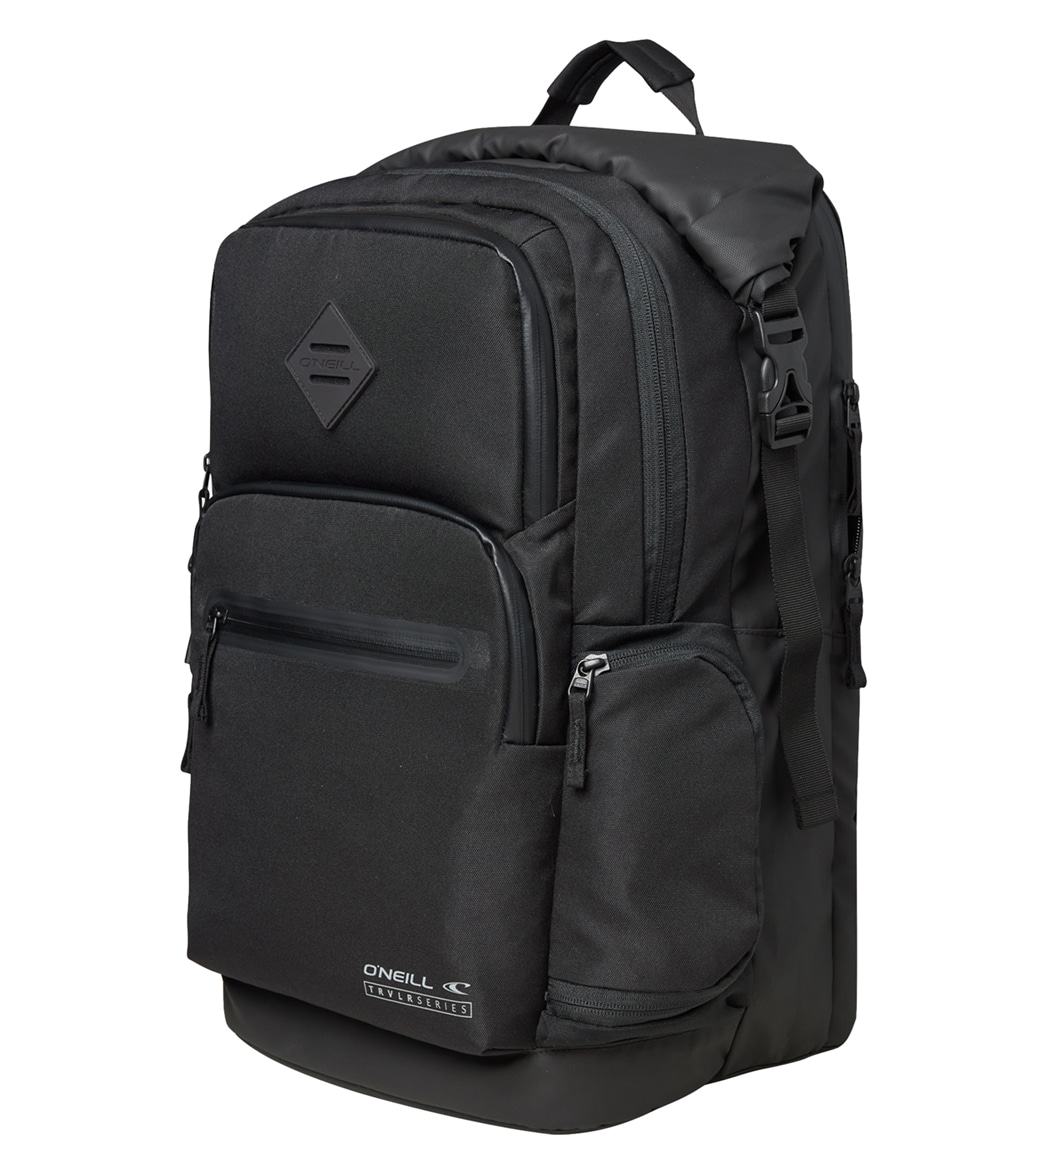 O'neill Men's Odyssey Trvlr Backpack - Black One Size Polyester - Swimoutlet.com